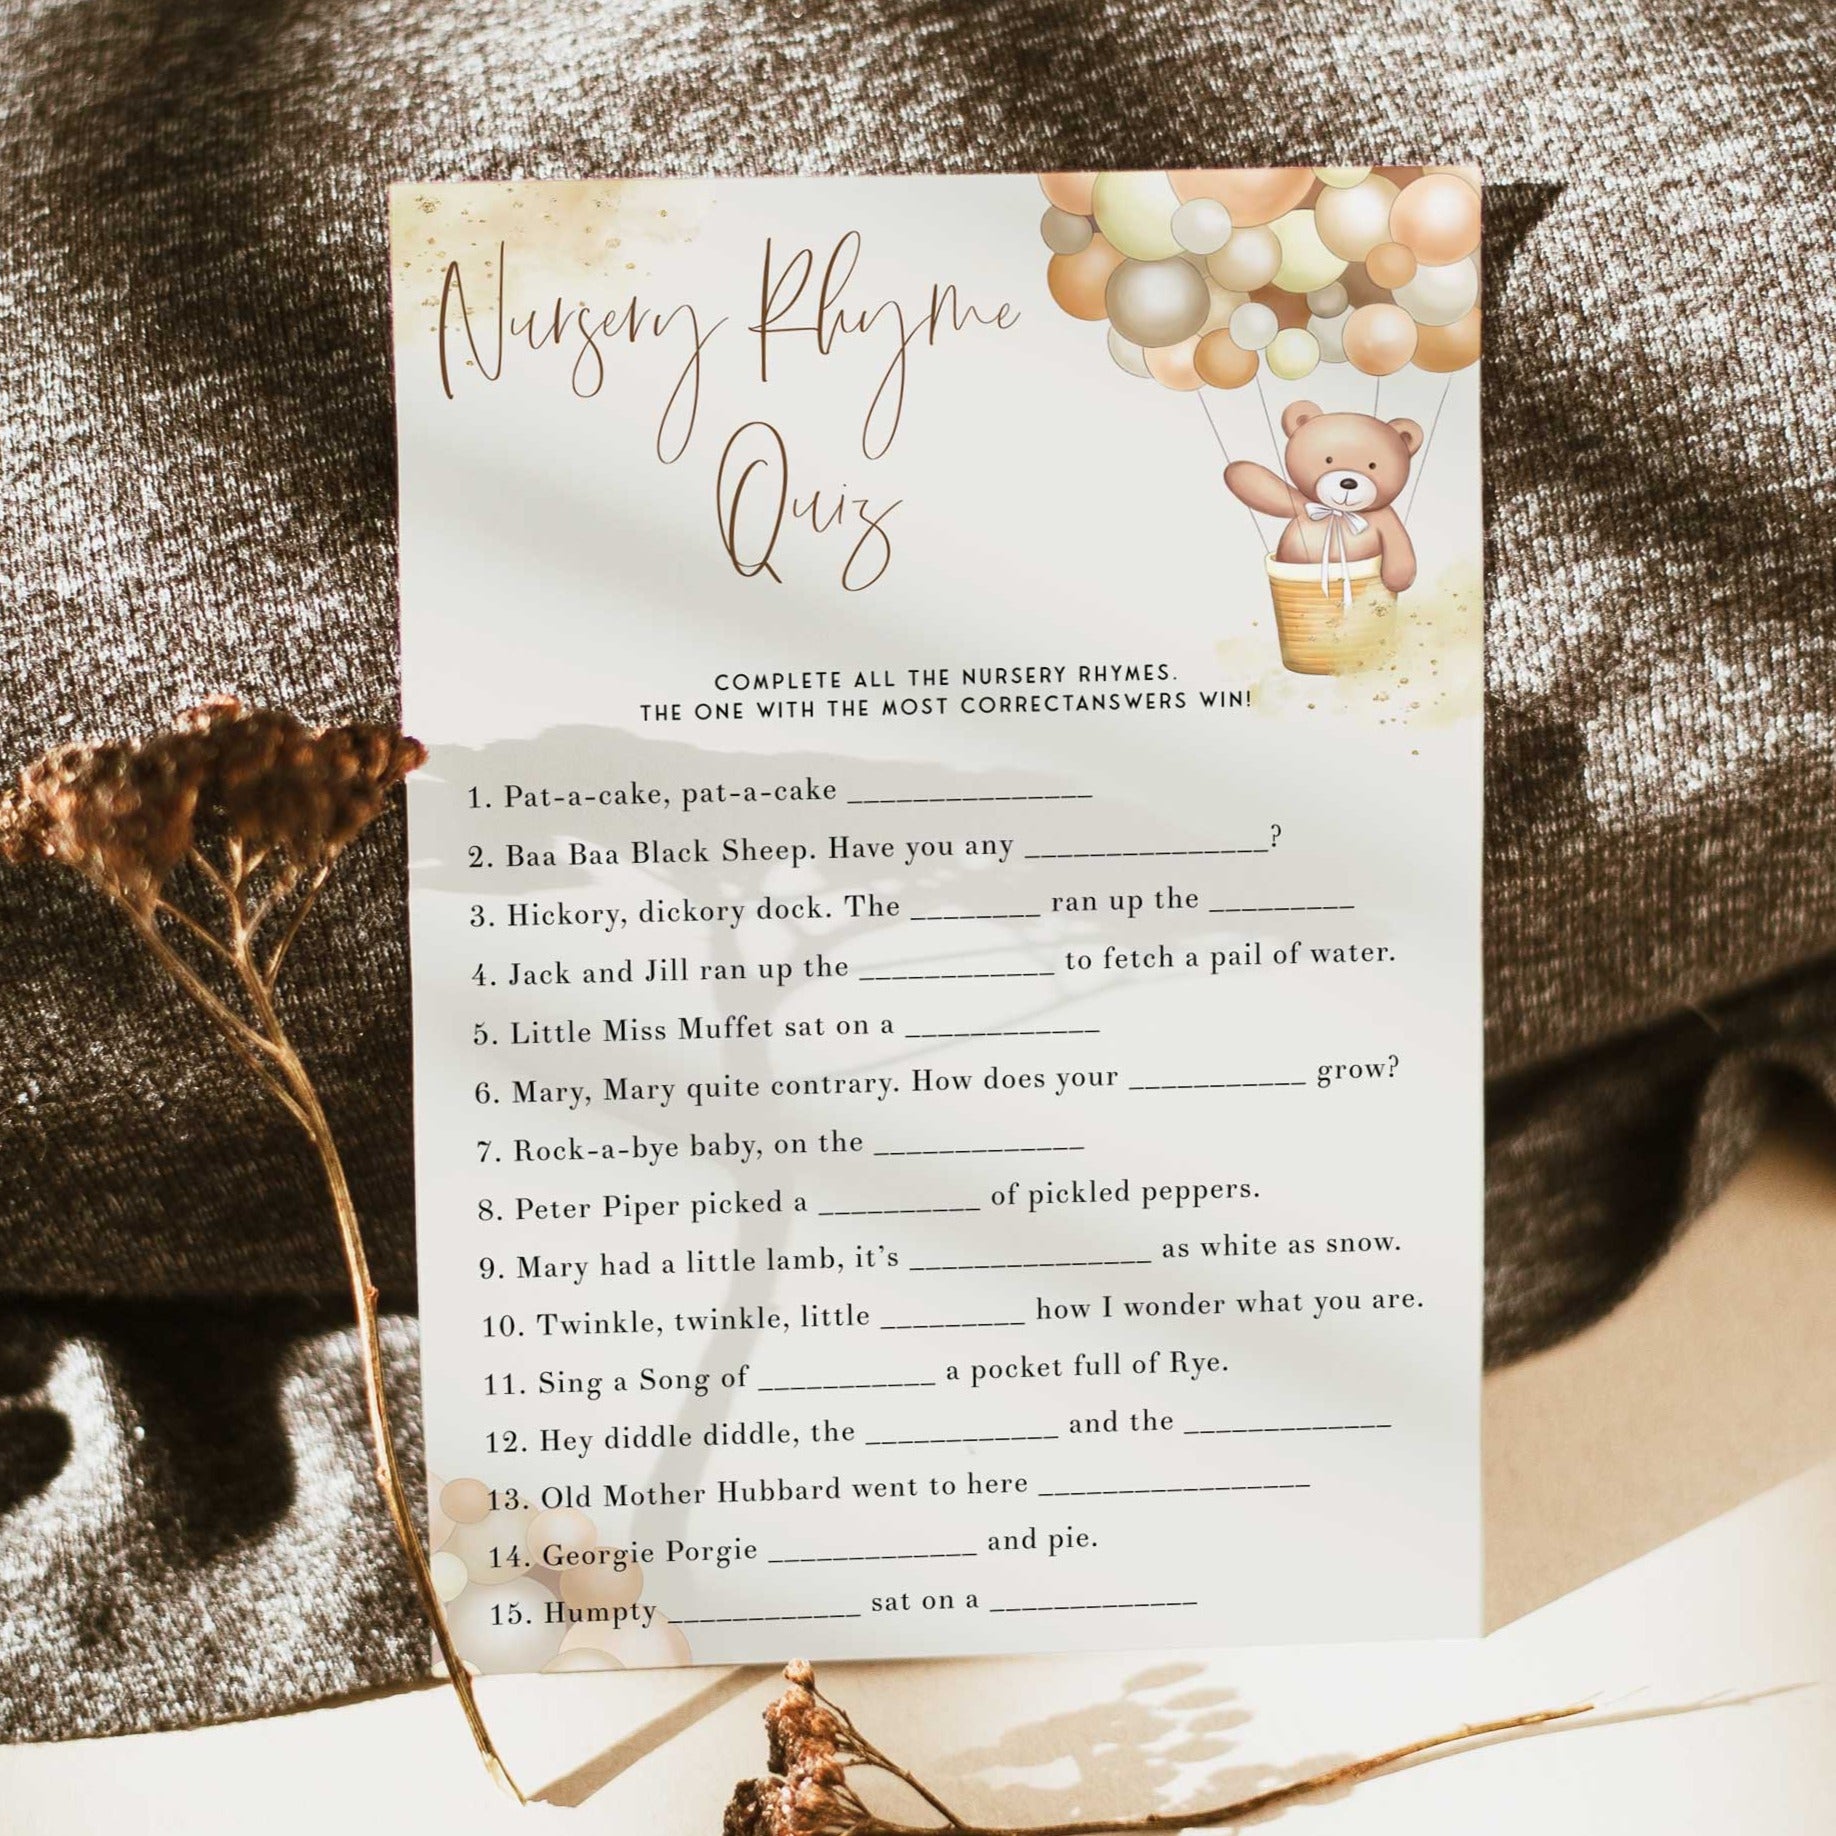 Fully editable and printable baby shower nursery rhyme quiz game with a hot air balloon teddy bear, we can bearly wait design. Perfect for a We Can Bearly Wait baby shower themed party